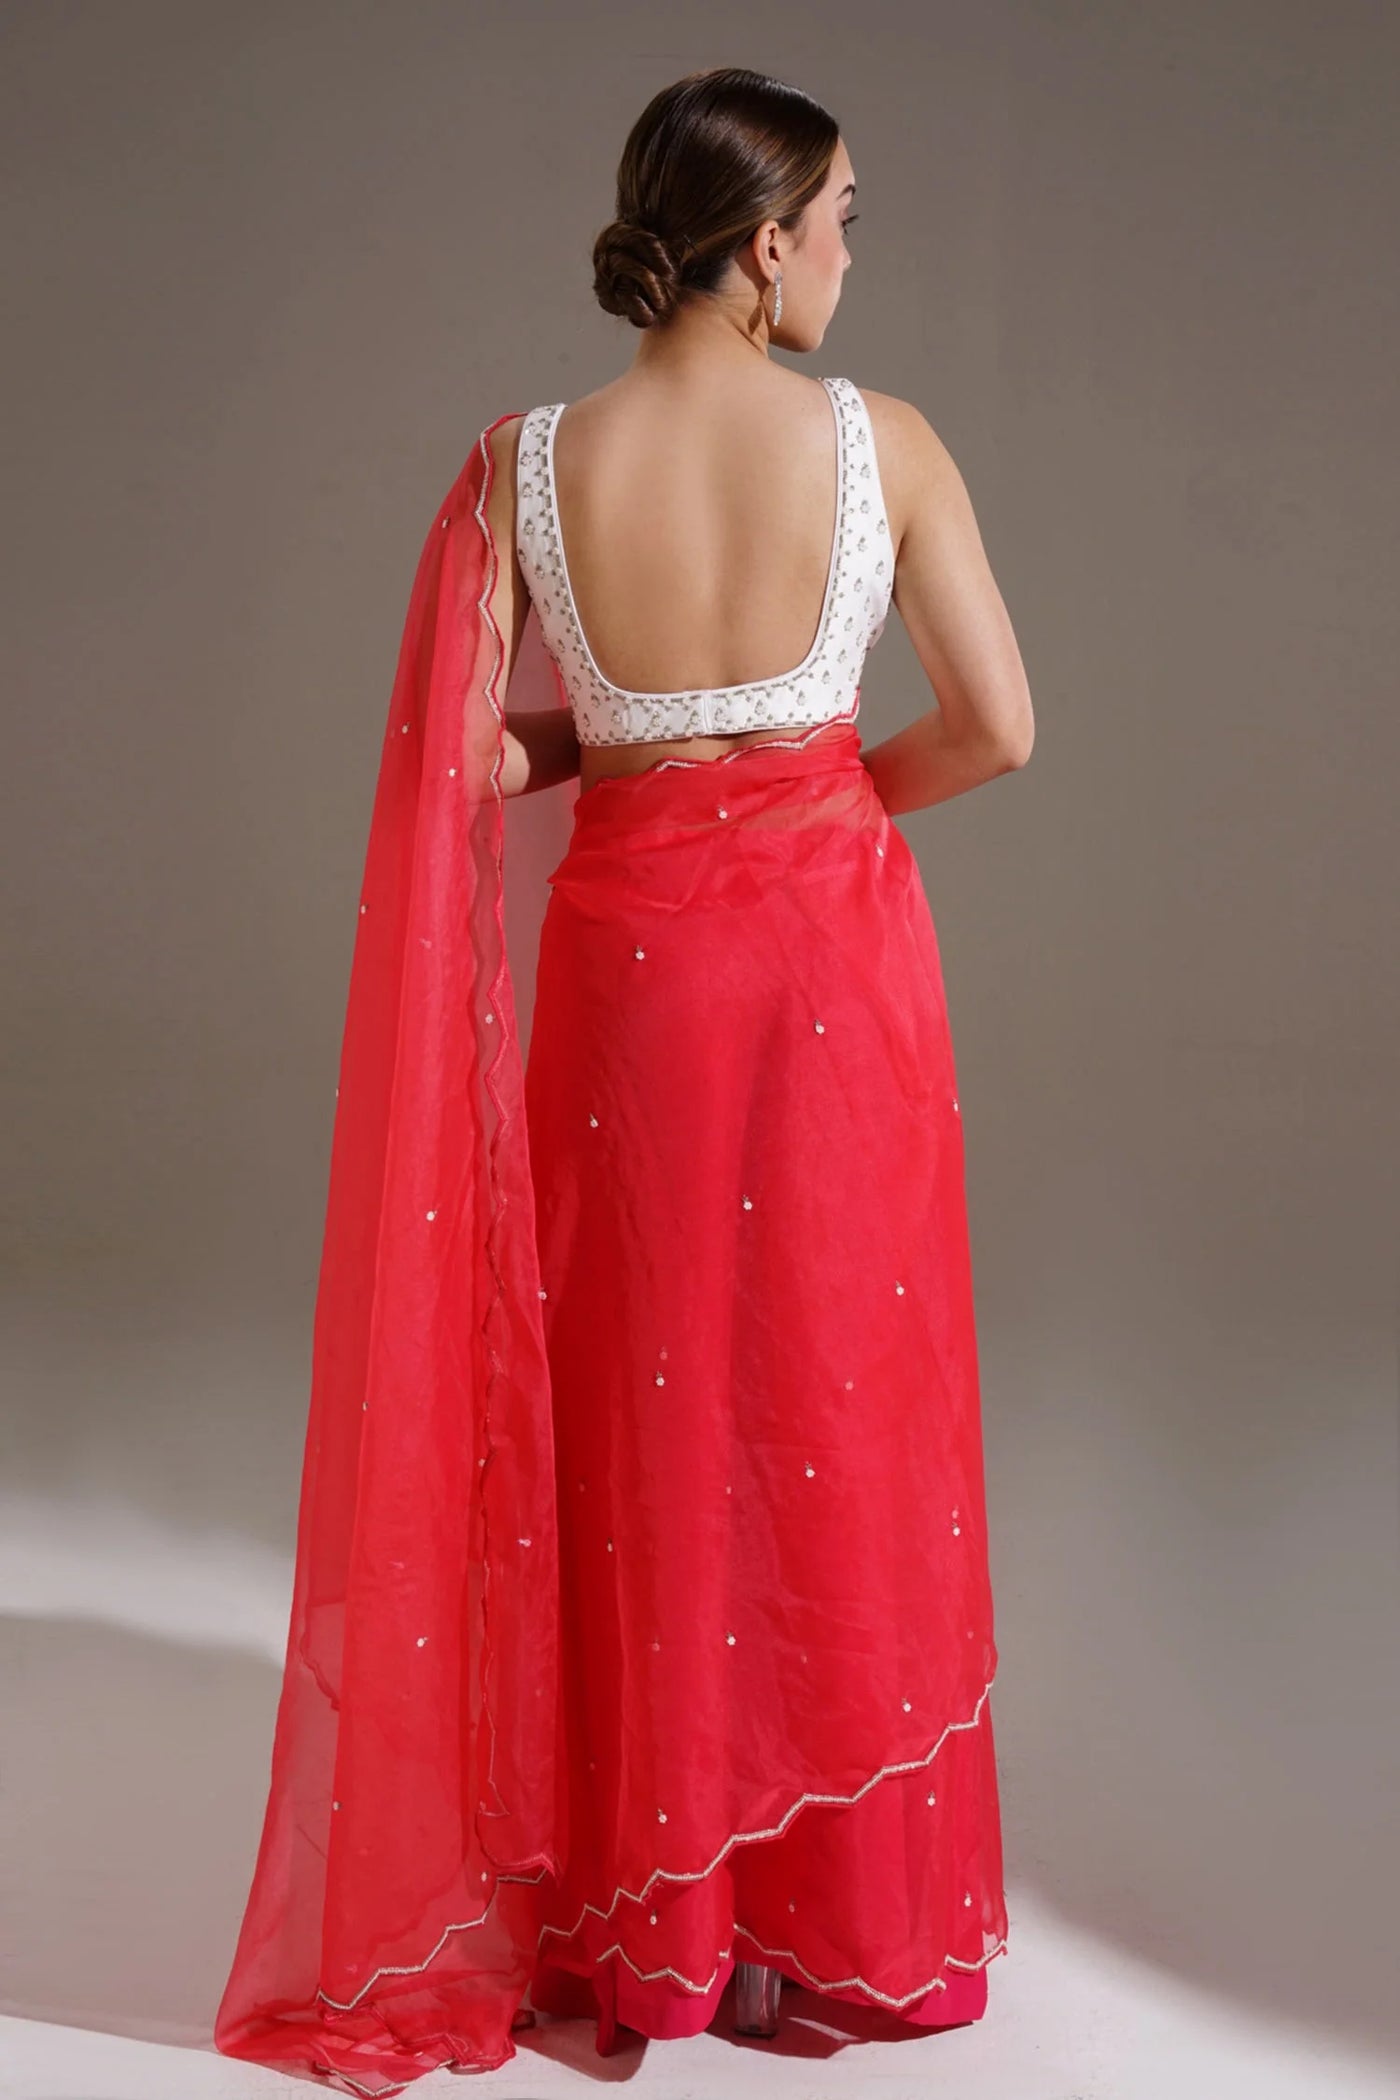 Red Crepe Organza Saree - Indian Clothing in Denver, CO, Aurora, CO, Boulder, CO, Fort Collins, CO, Colorado Springs, CO, Parker, CO, Highlands Ranch, CO, Cherry Creek, CO, Centennial, CO, and Longmont, CO. Nationwide shipping USA - India Fashion X